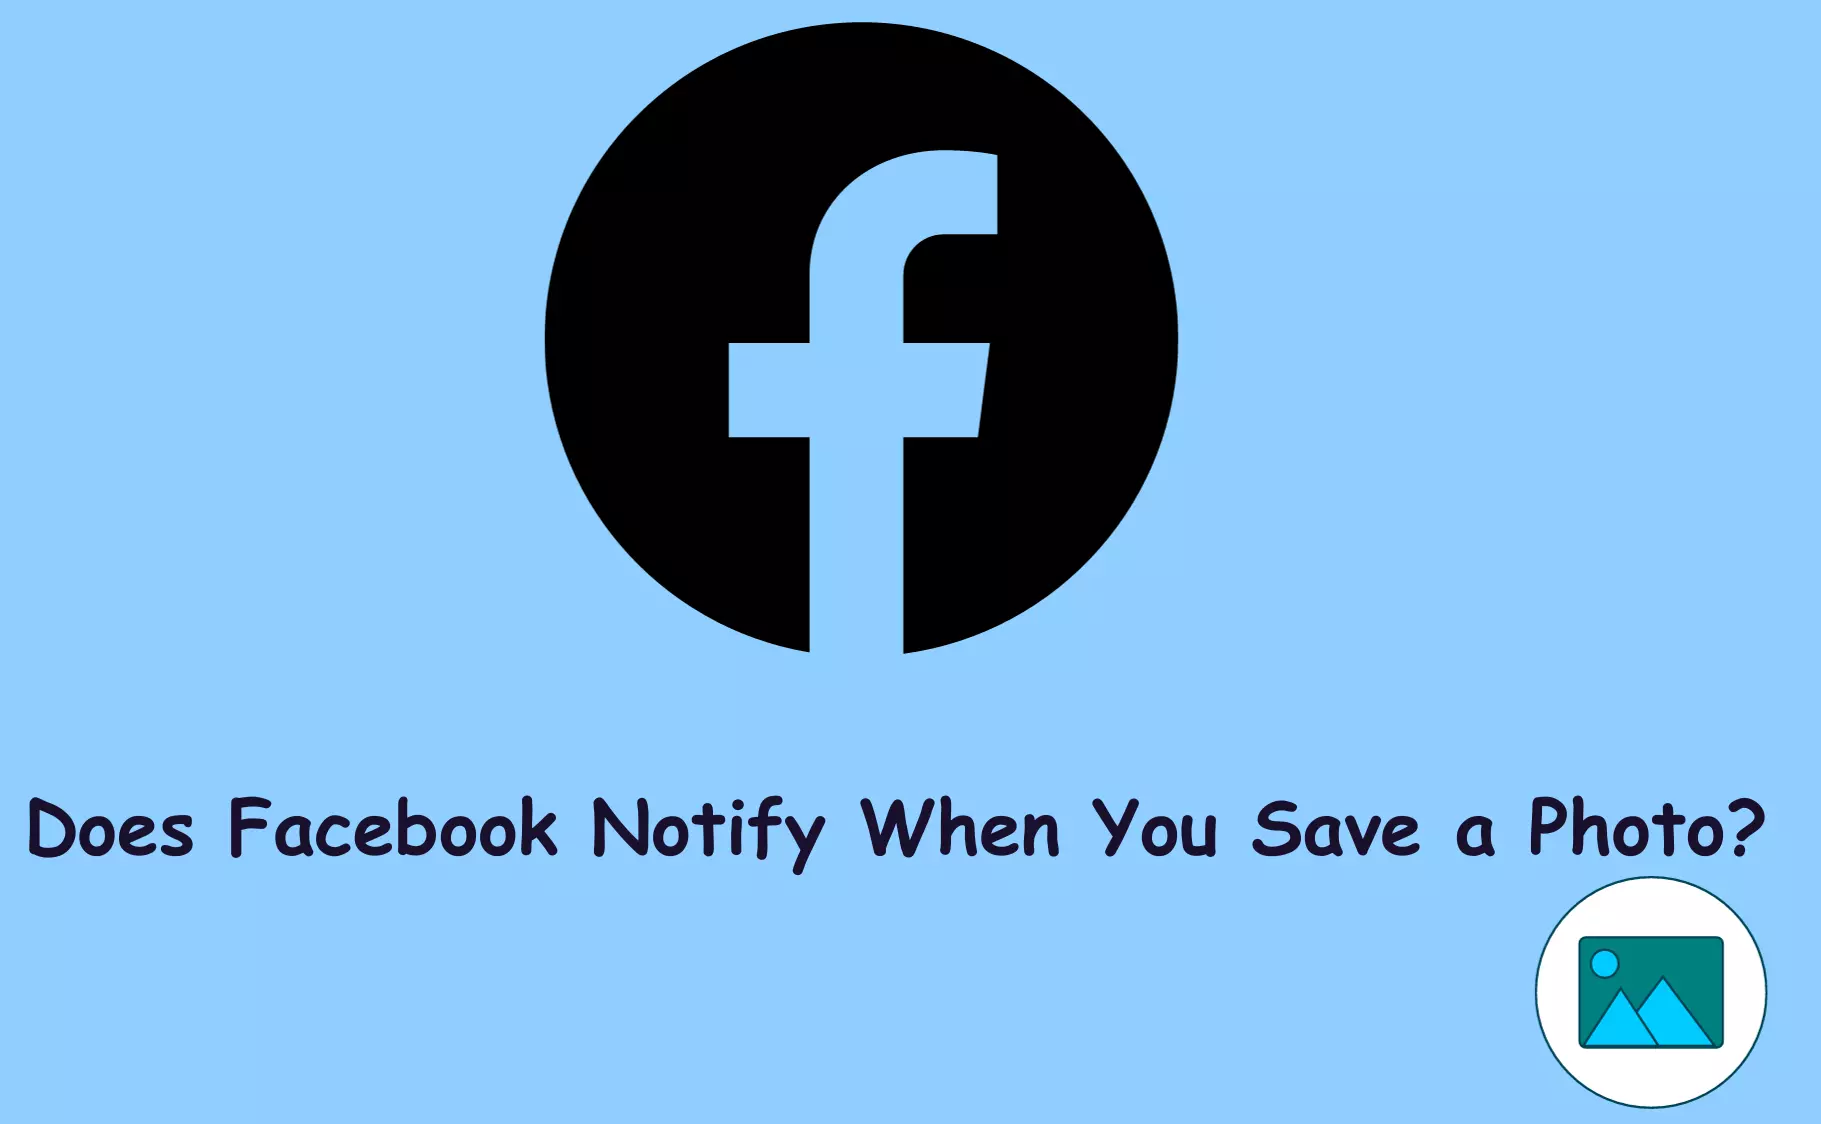 Does Facebook Notify When You Save a Photo?